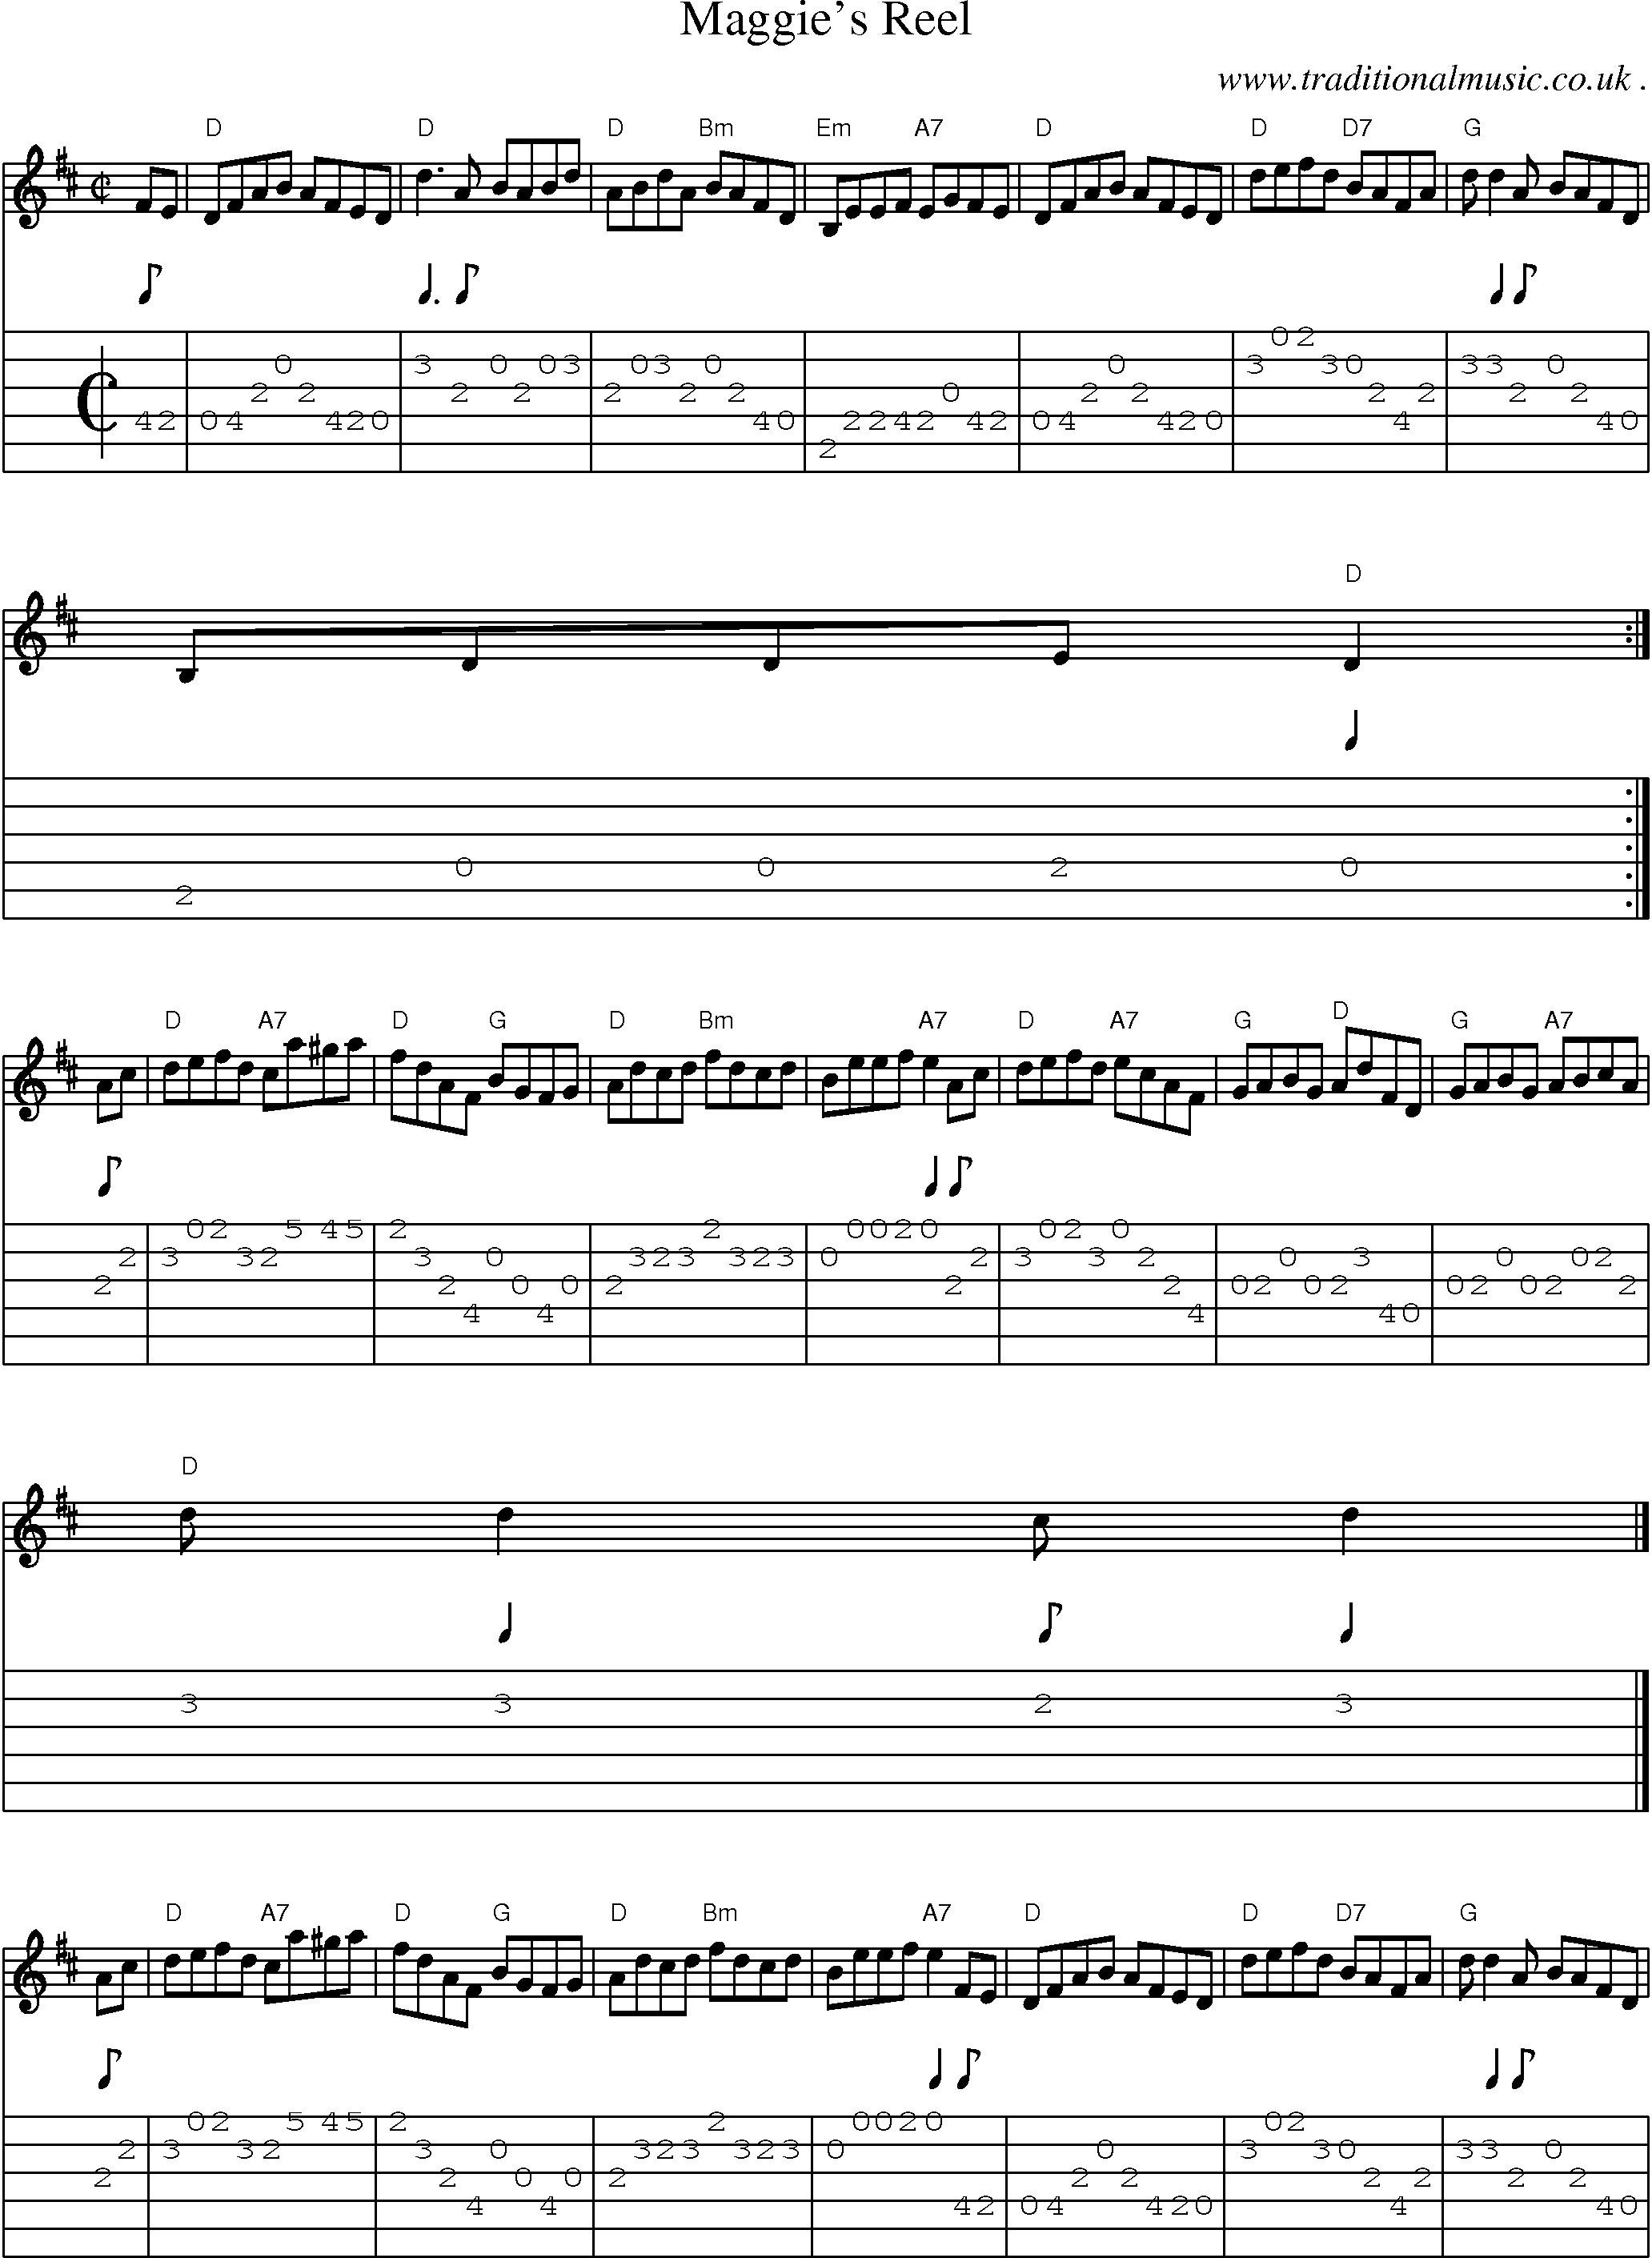 Sheet-music  score, Chords and Guitar Tabs for Maggies Reel